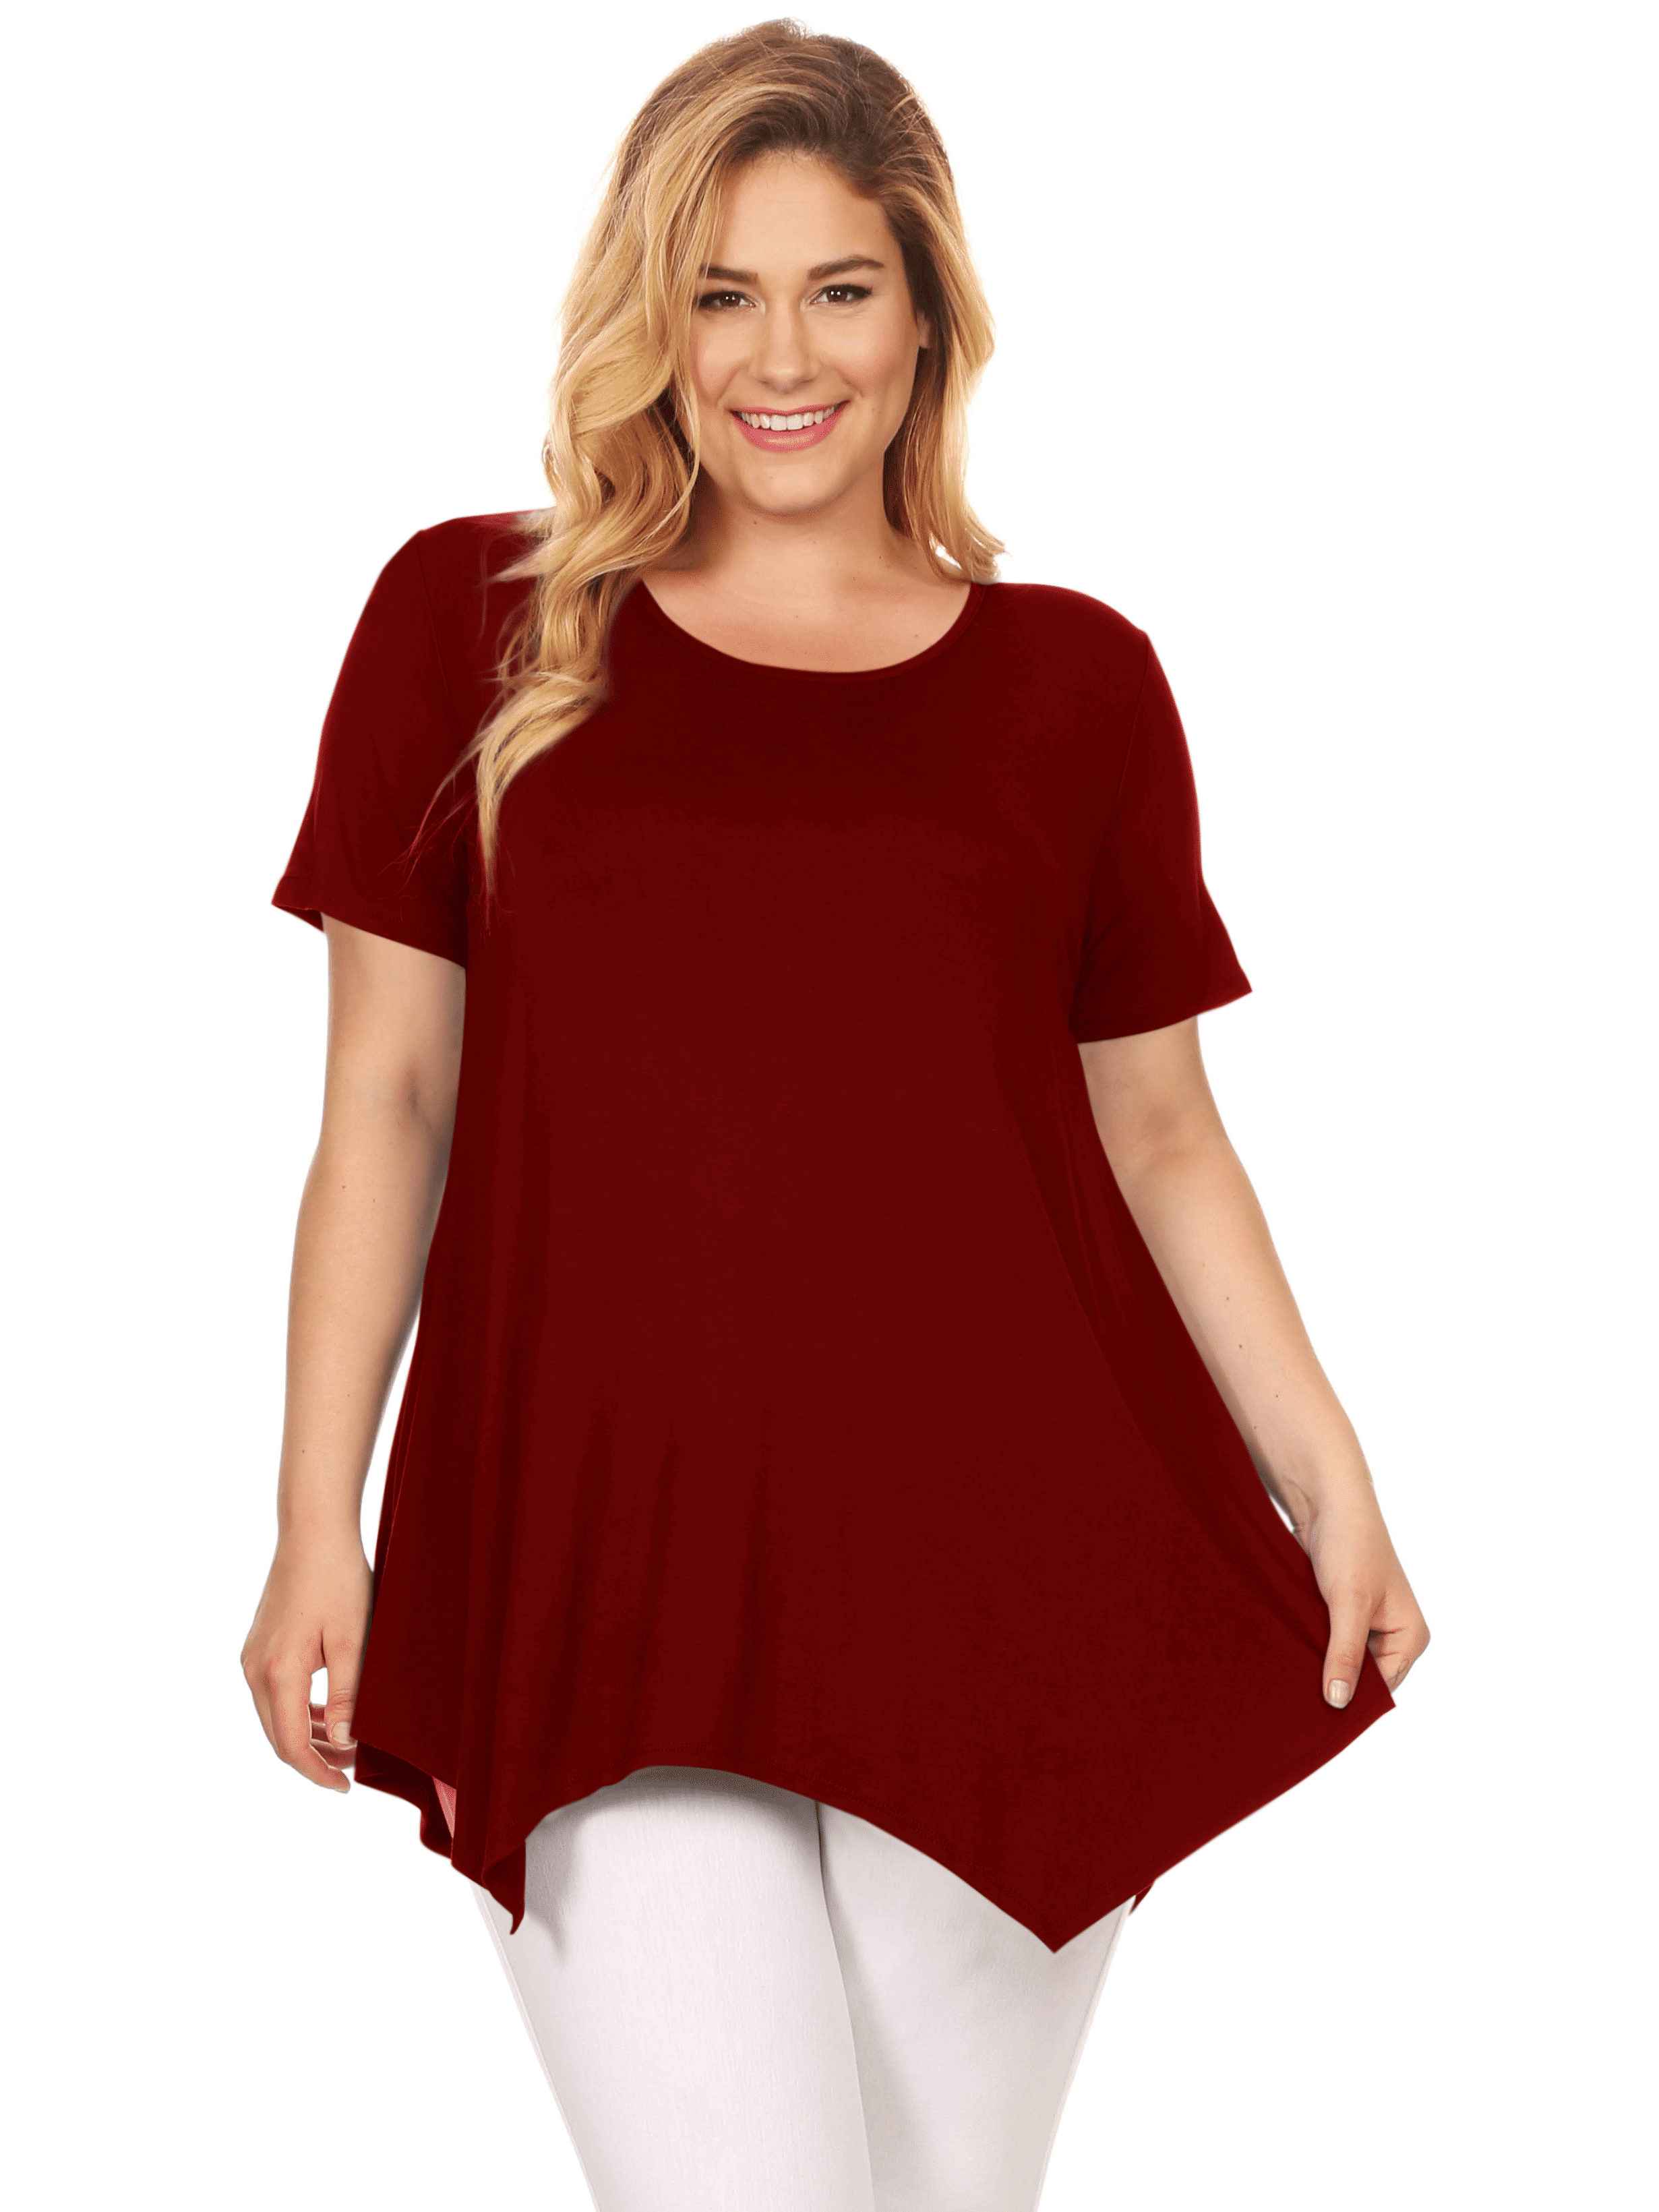 The Best Plus Size Tops to Wear With Leggings